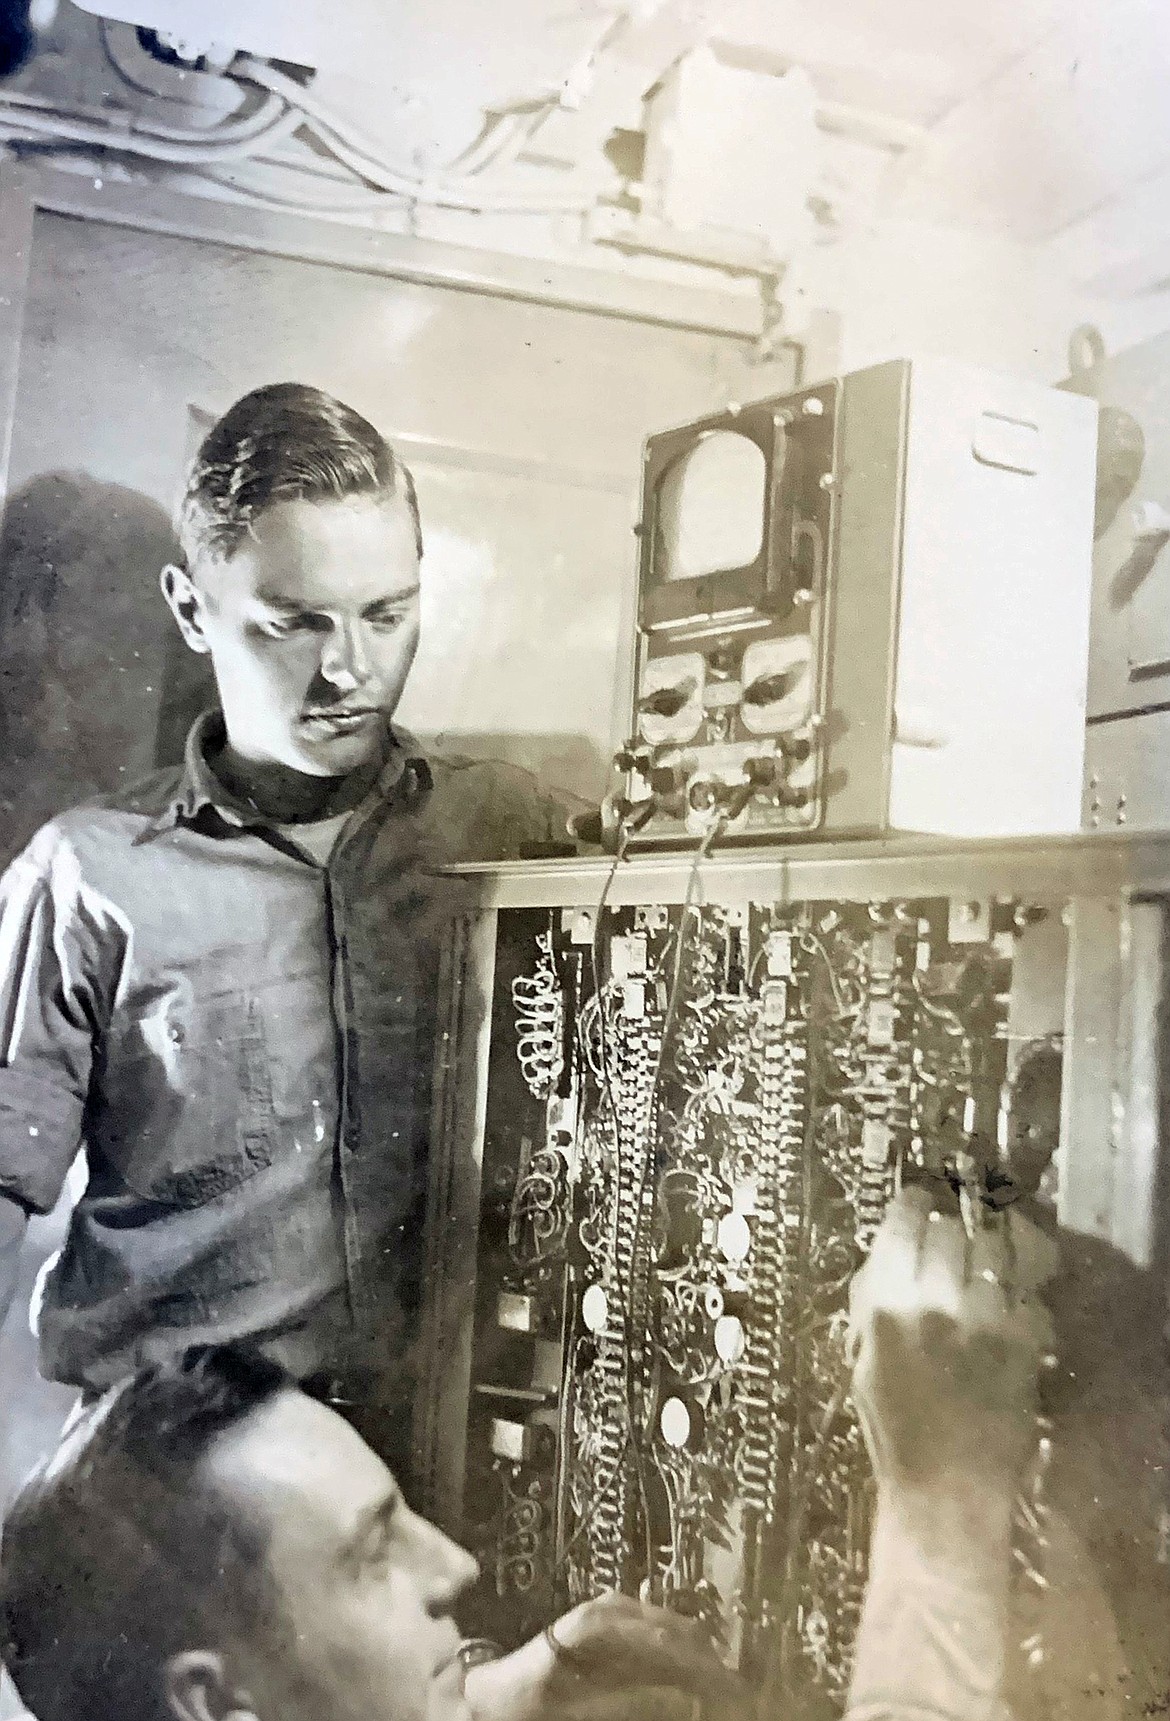 Arnold Peterson oversees repairs to the ship's radio aboard the destroyer U.S.S. Healy during World War II. (photo provided)